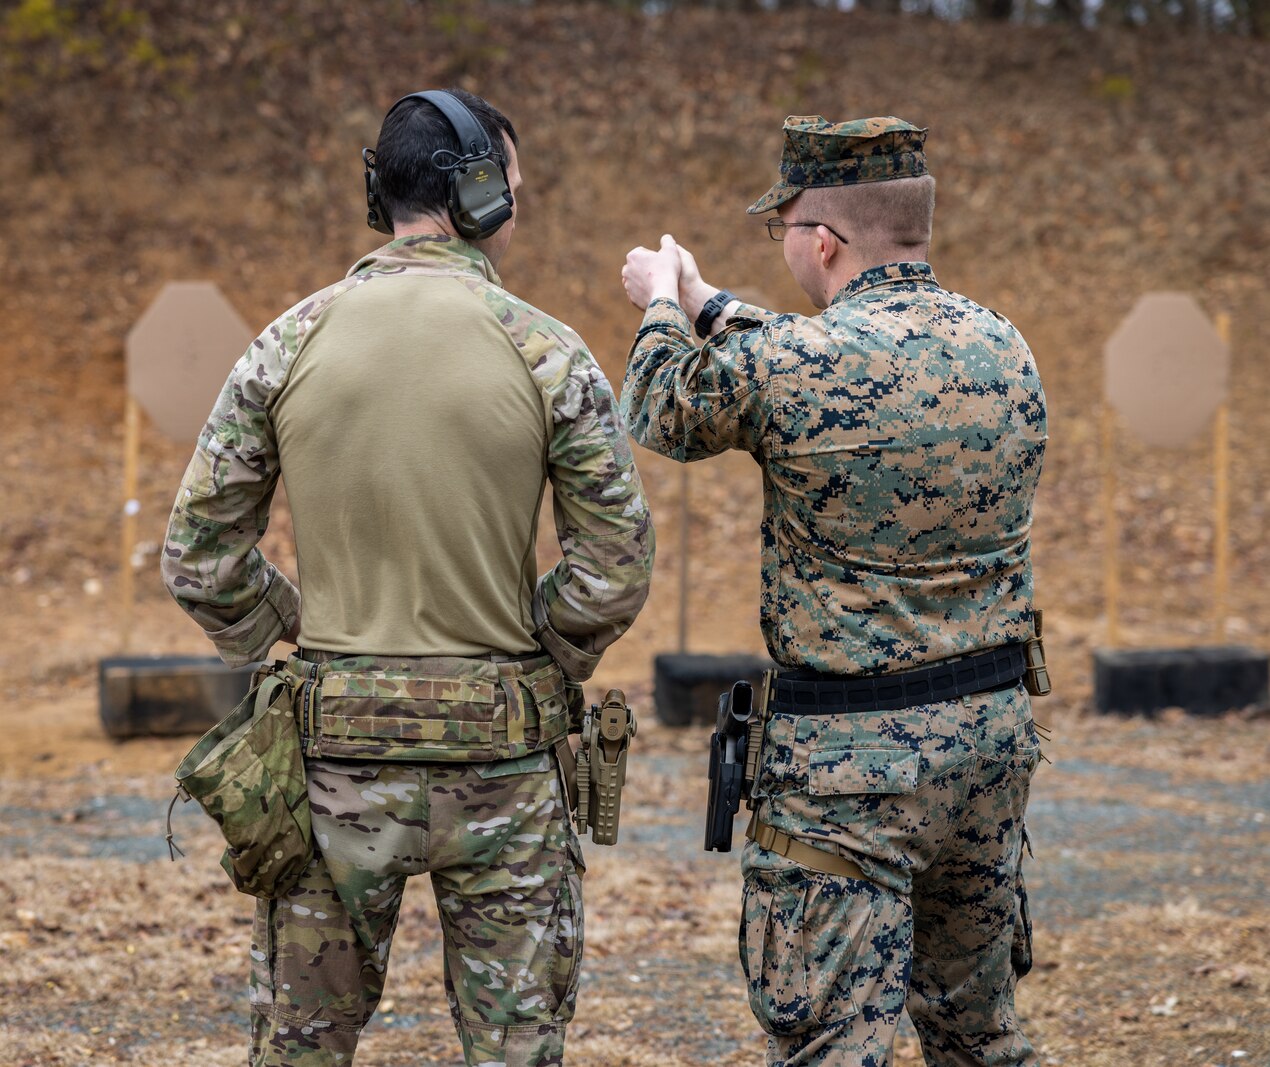 A British Royal Marine conducts shooting drills with the Marine Corps Shooting Team during Operation Longshot at the pistol range on Marine Corps Base Quantico, Feb. 28, 2024. Operation Longshot exchanges service members from the two countries to share shooting techniques, evaluate each member’s skillset, and builds report amongst the two services. (U.S. Marine Corps photo by Lance Cpl. Ethan Miller)